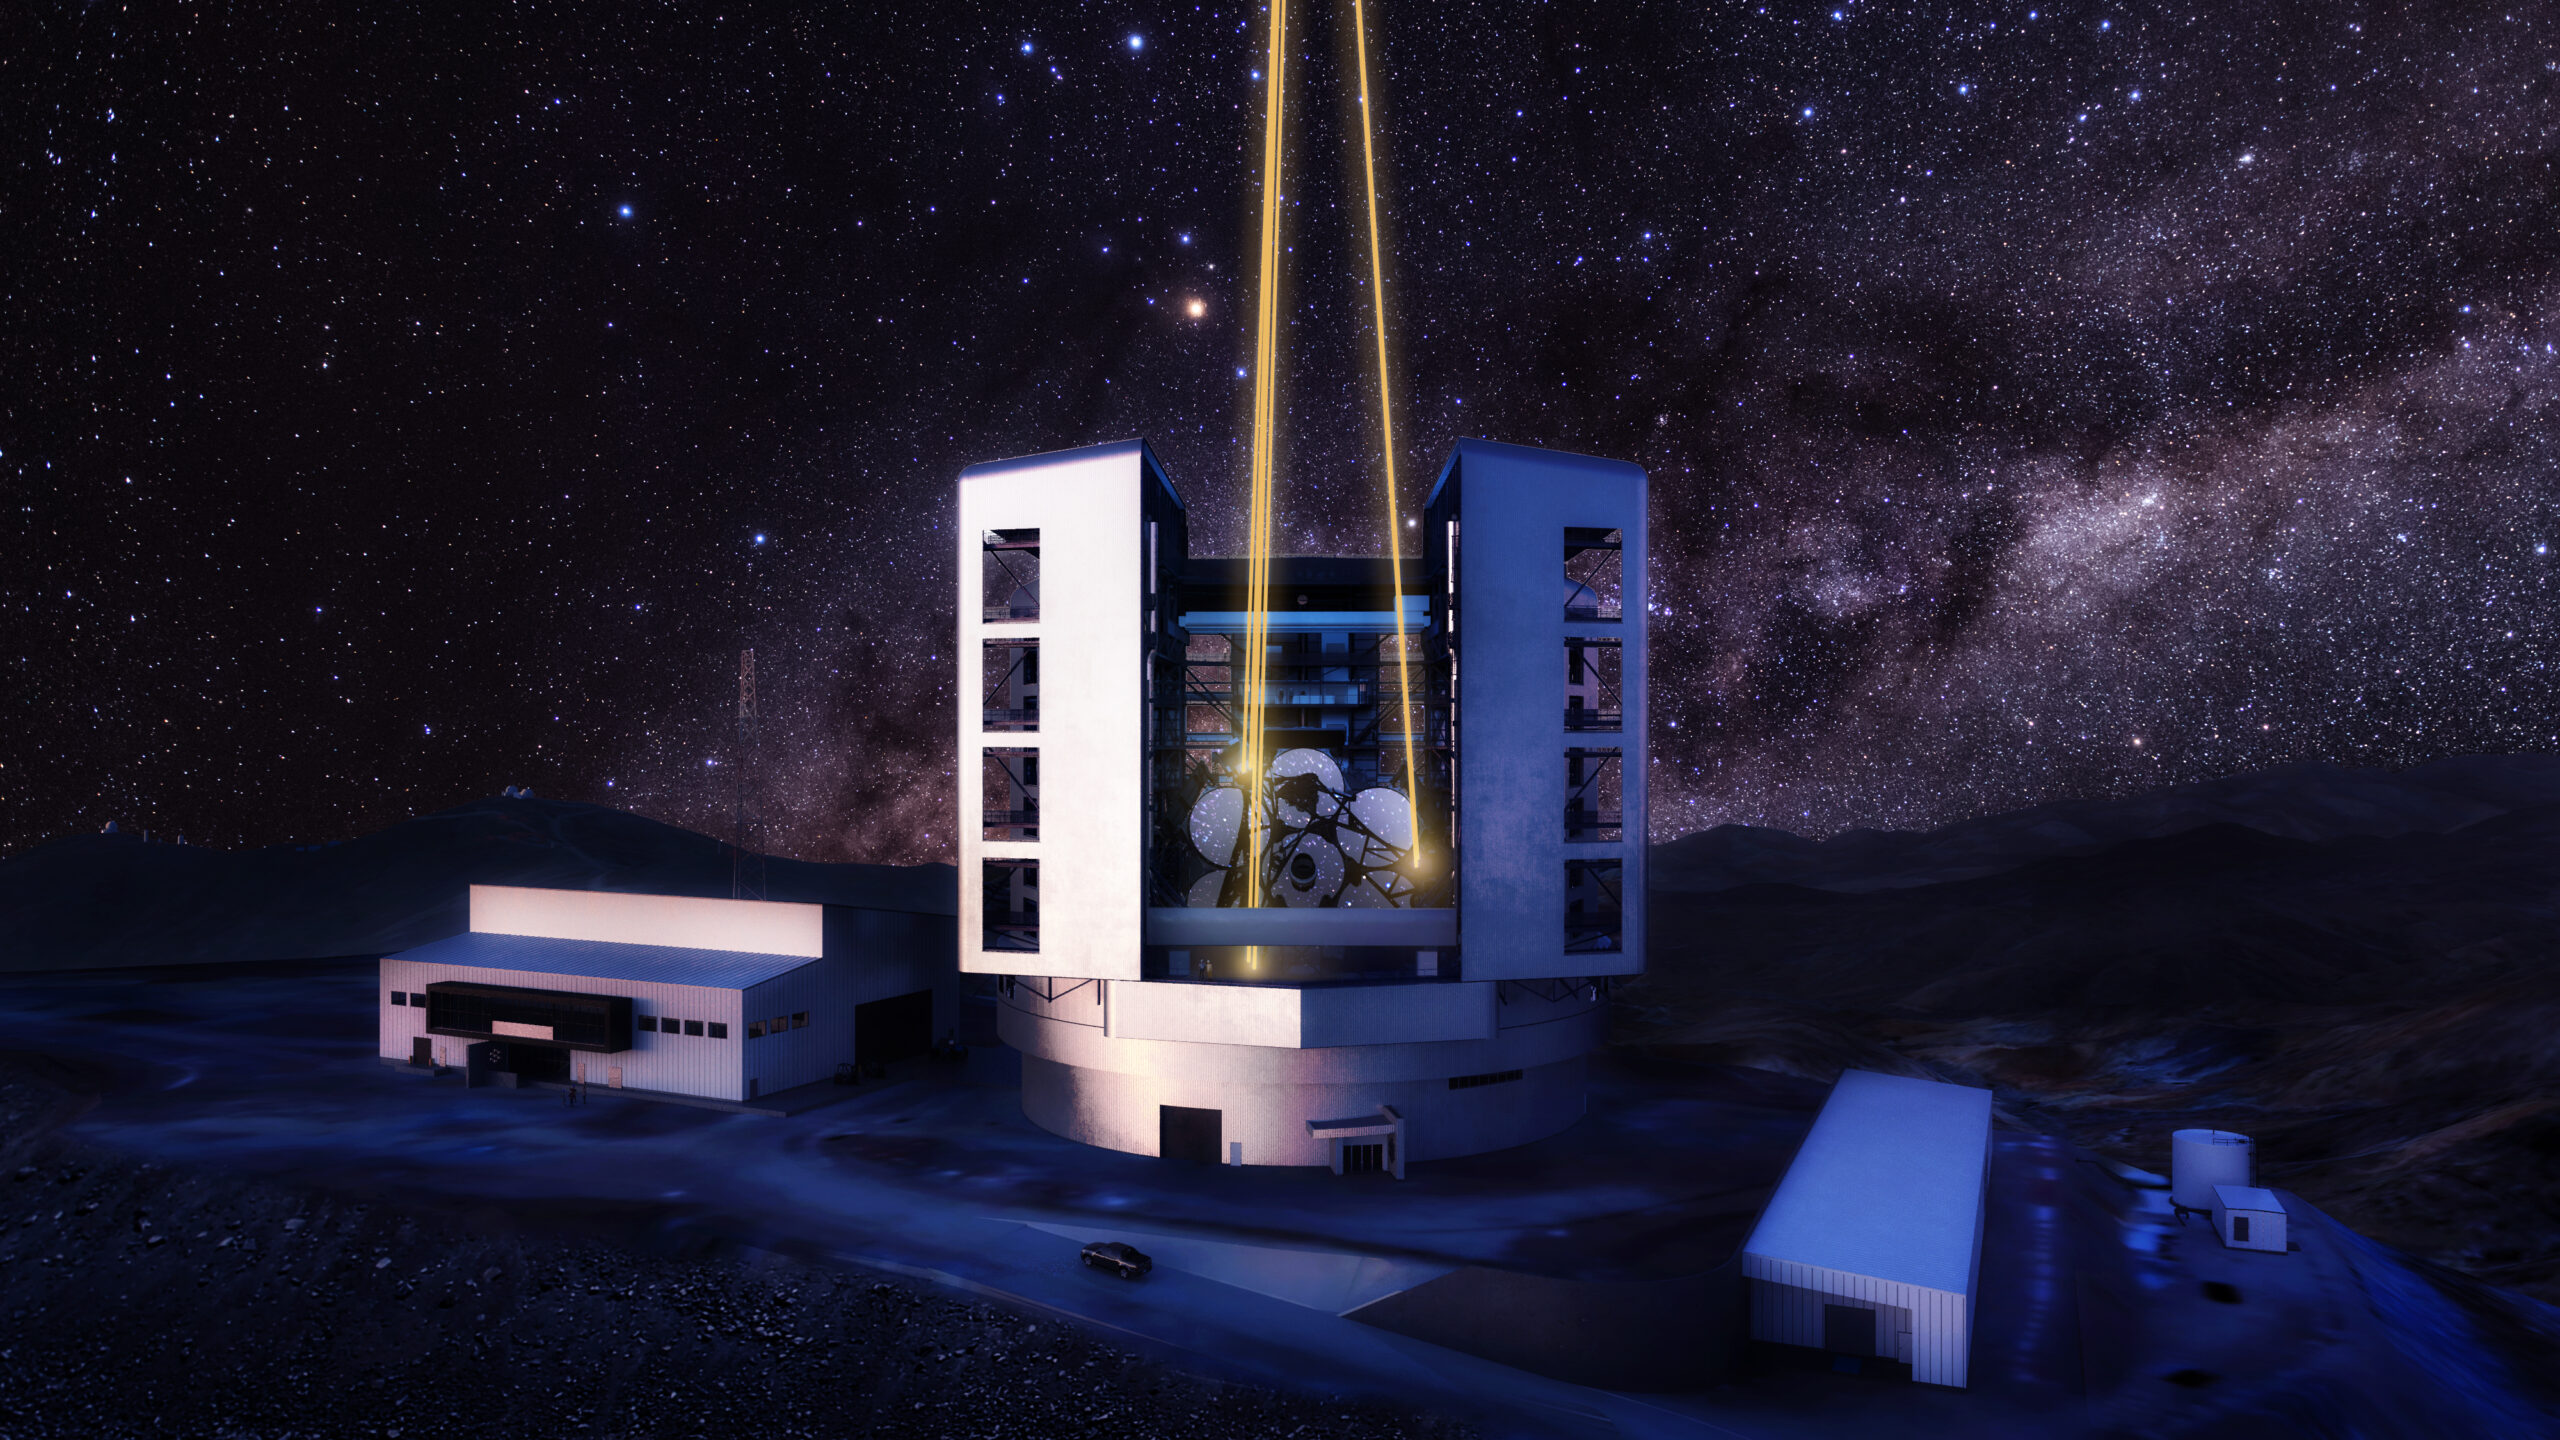 Artist's rendering of the Giant Magellan Telescope's exterior with lasers